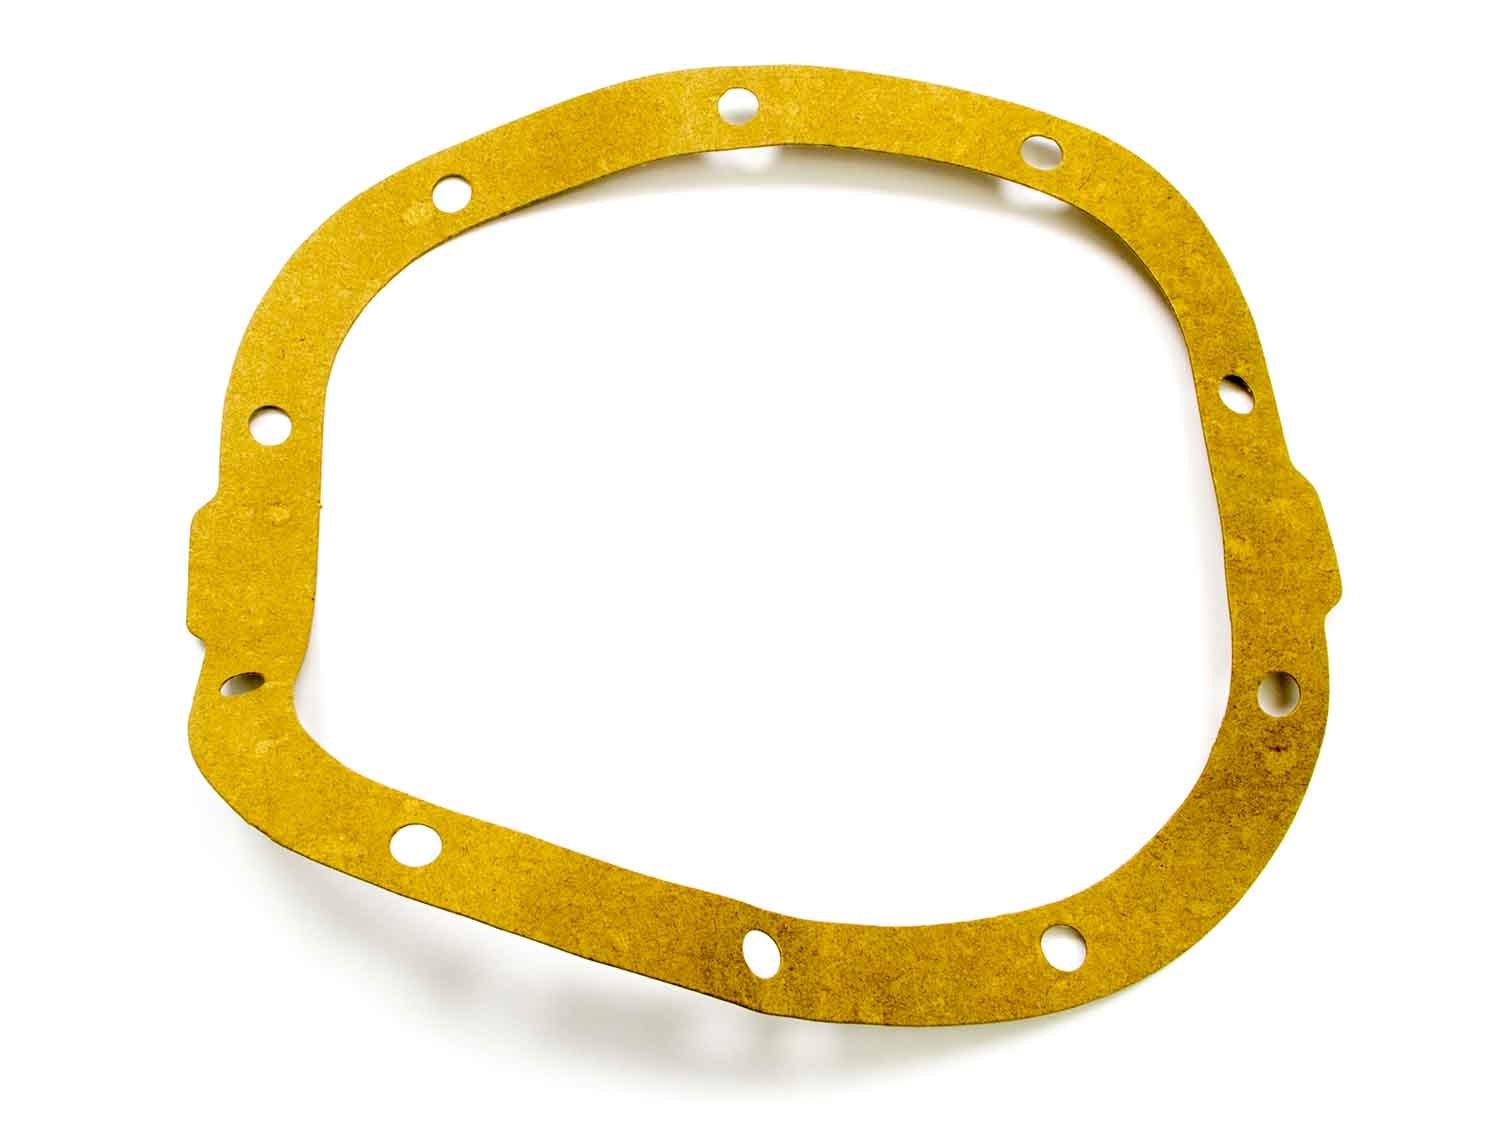 Ratech 5110 Differential Cover Gasket, Paper, 7.5 in / 7.625 in, GM 10-Bolt, Each